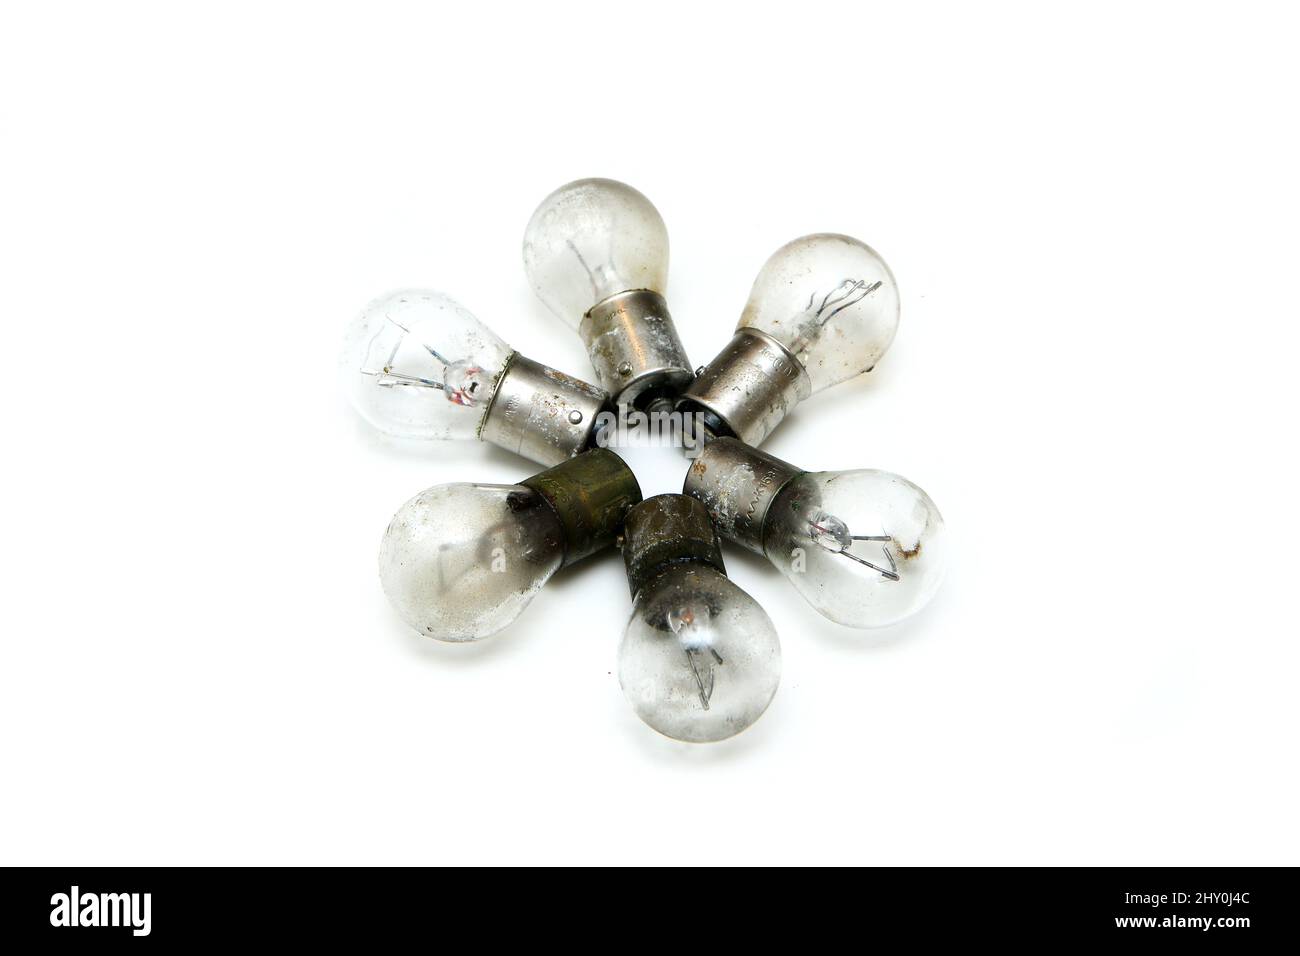 The small group of old shabby small bulbs for the car lights isolated in the white background. Stock Photo